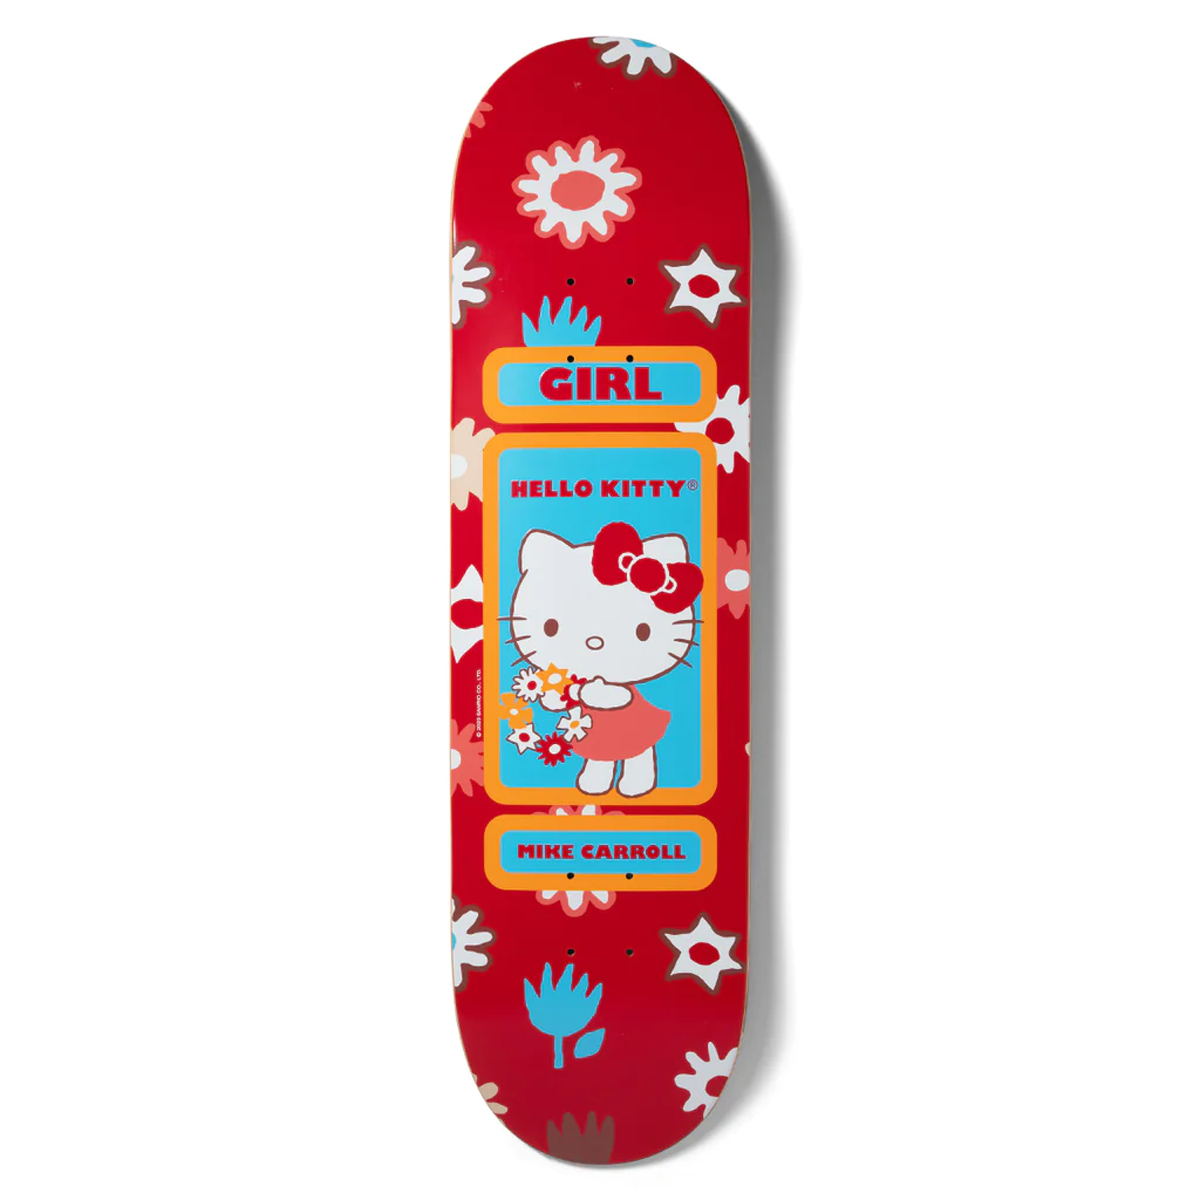 Girl x Hello Kitty Carroll Hello Kitty and Friends Skate Deck - Assorted Sizes